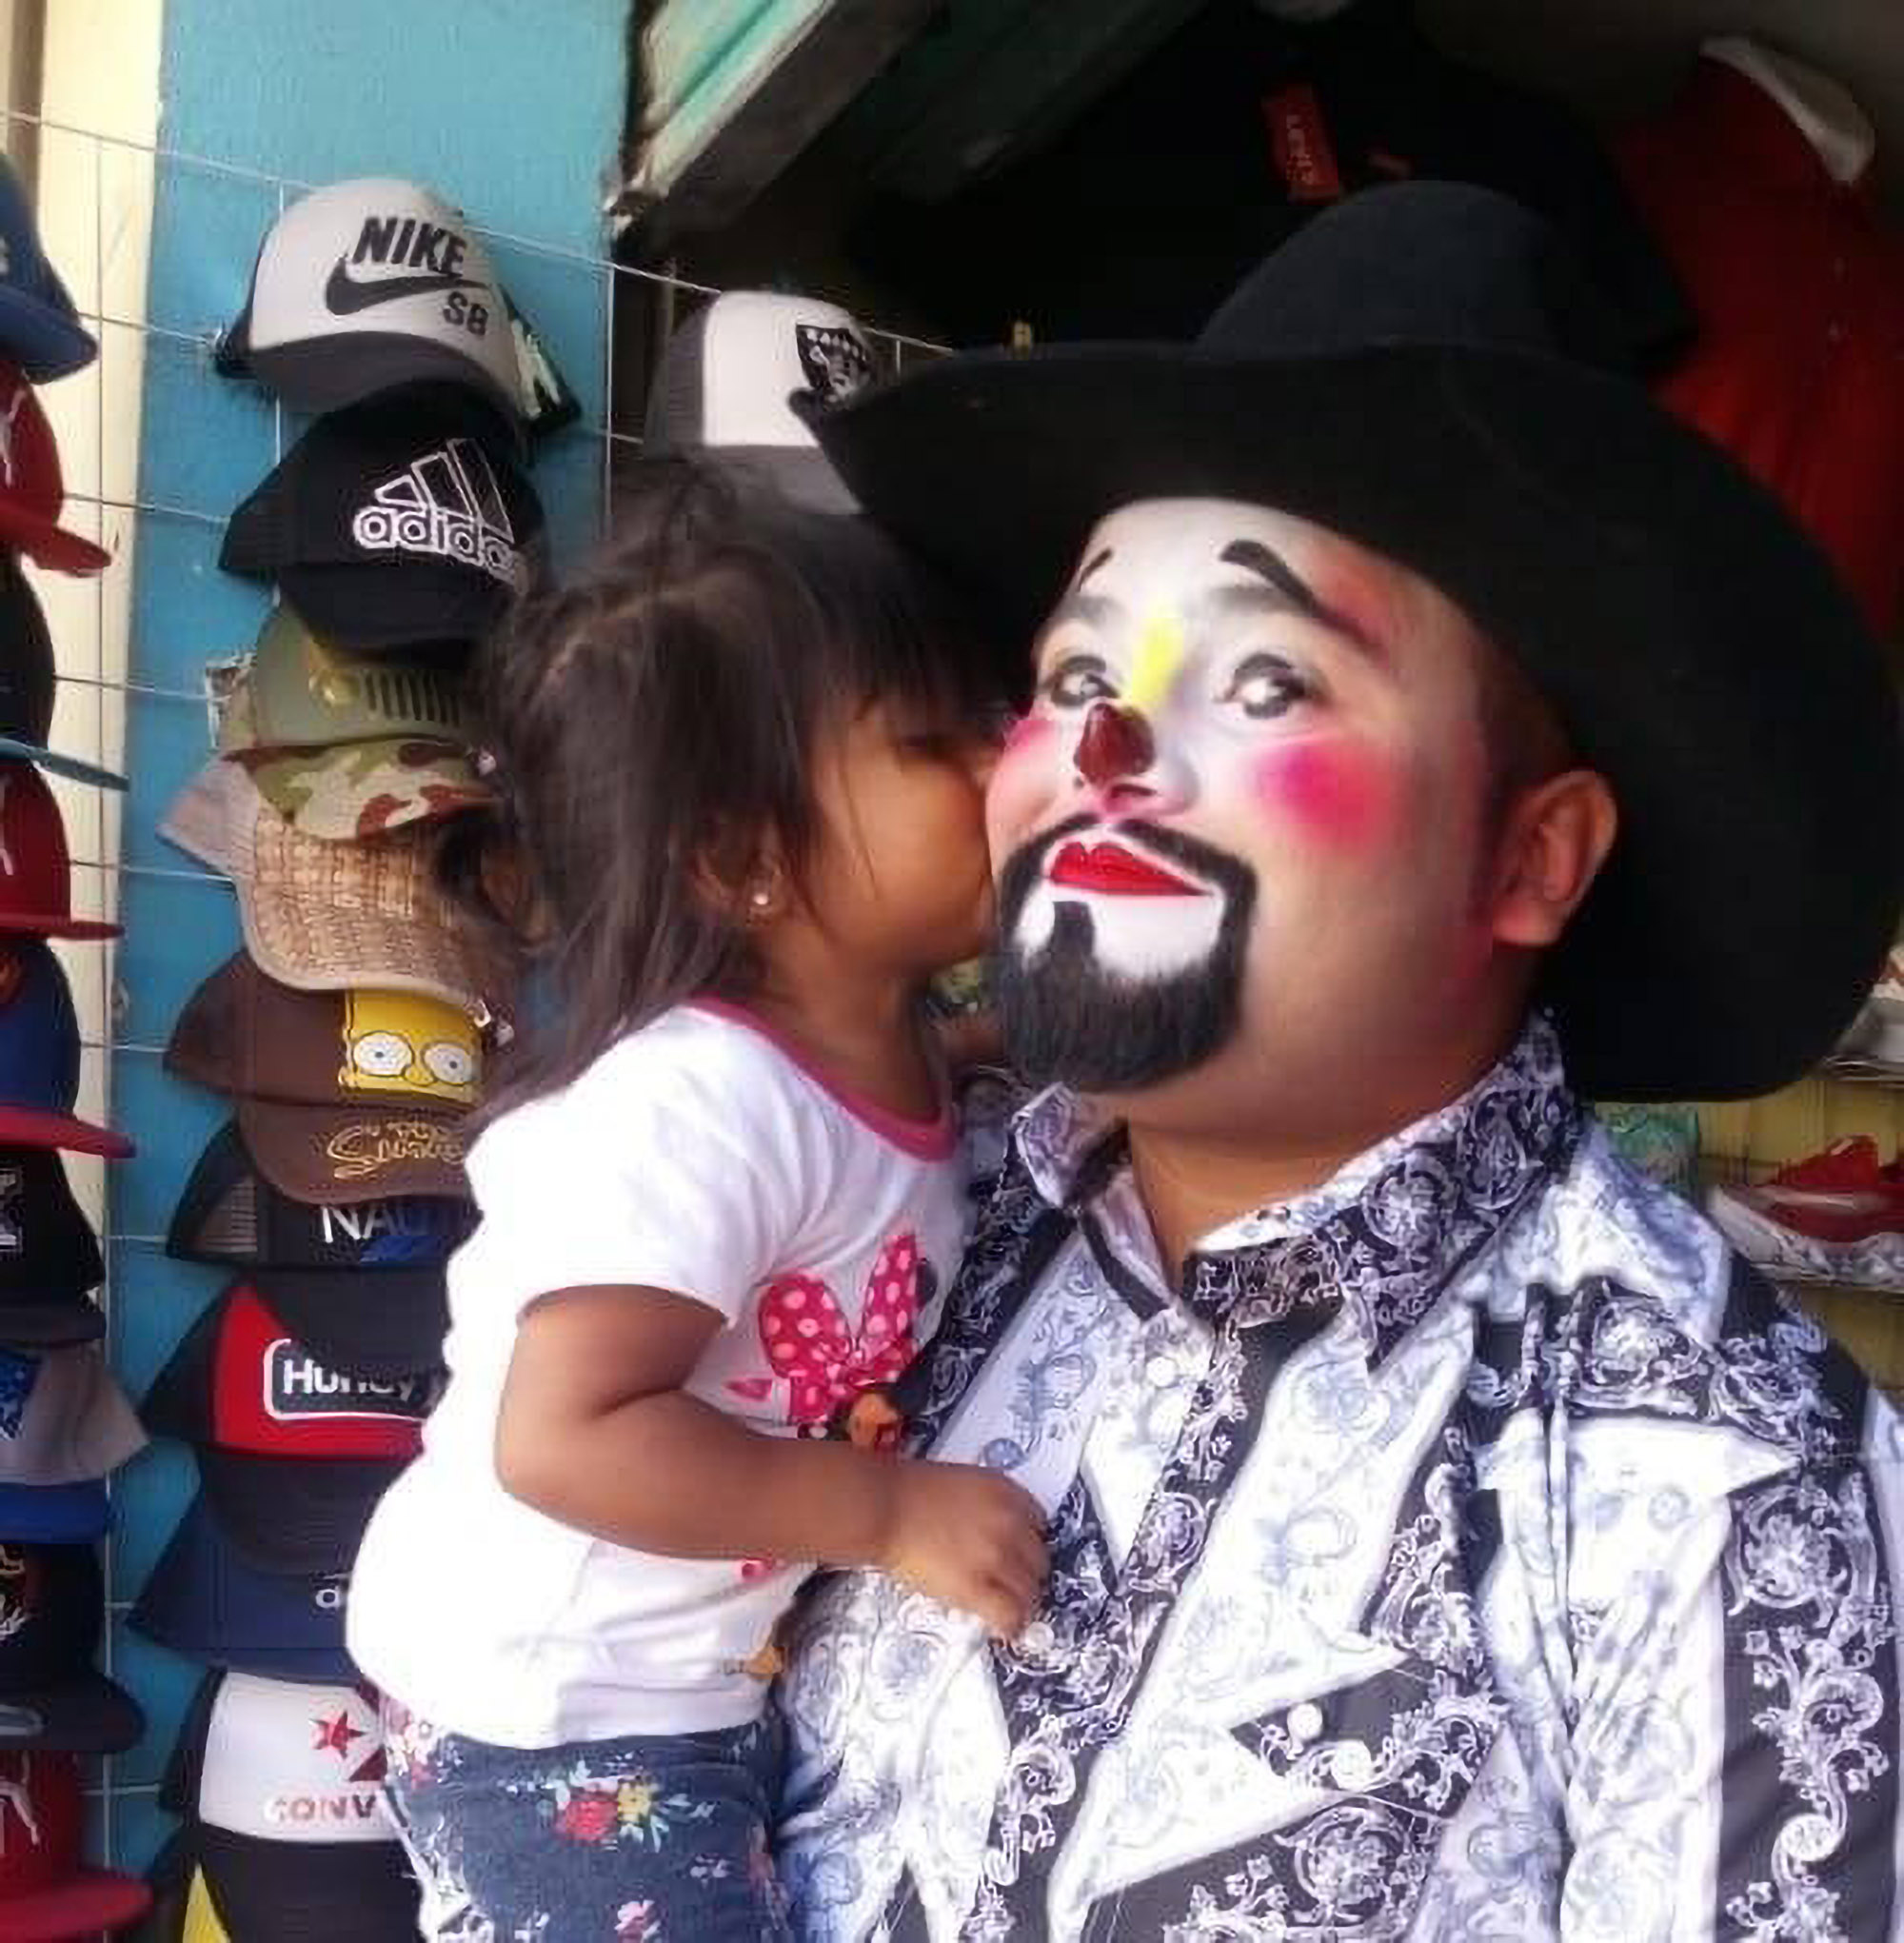 Read more about the article Stetson-Wearing Cowboy Clown Jailed For 235 Years